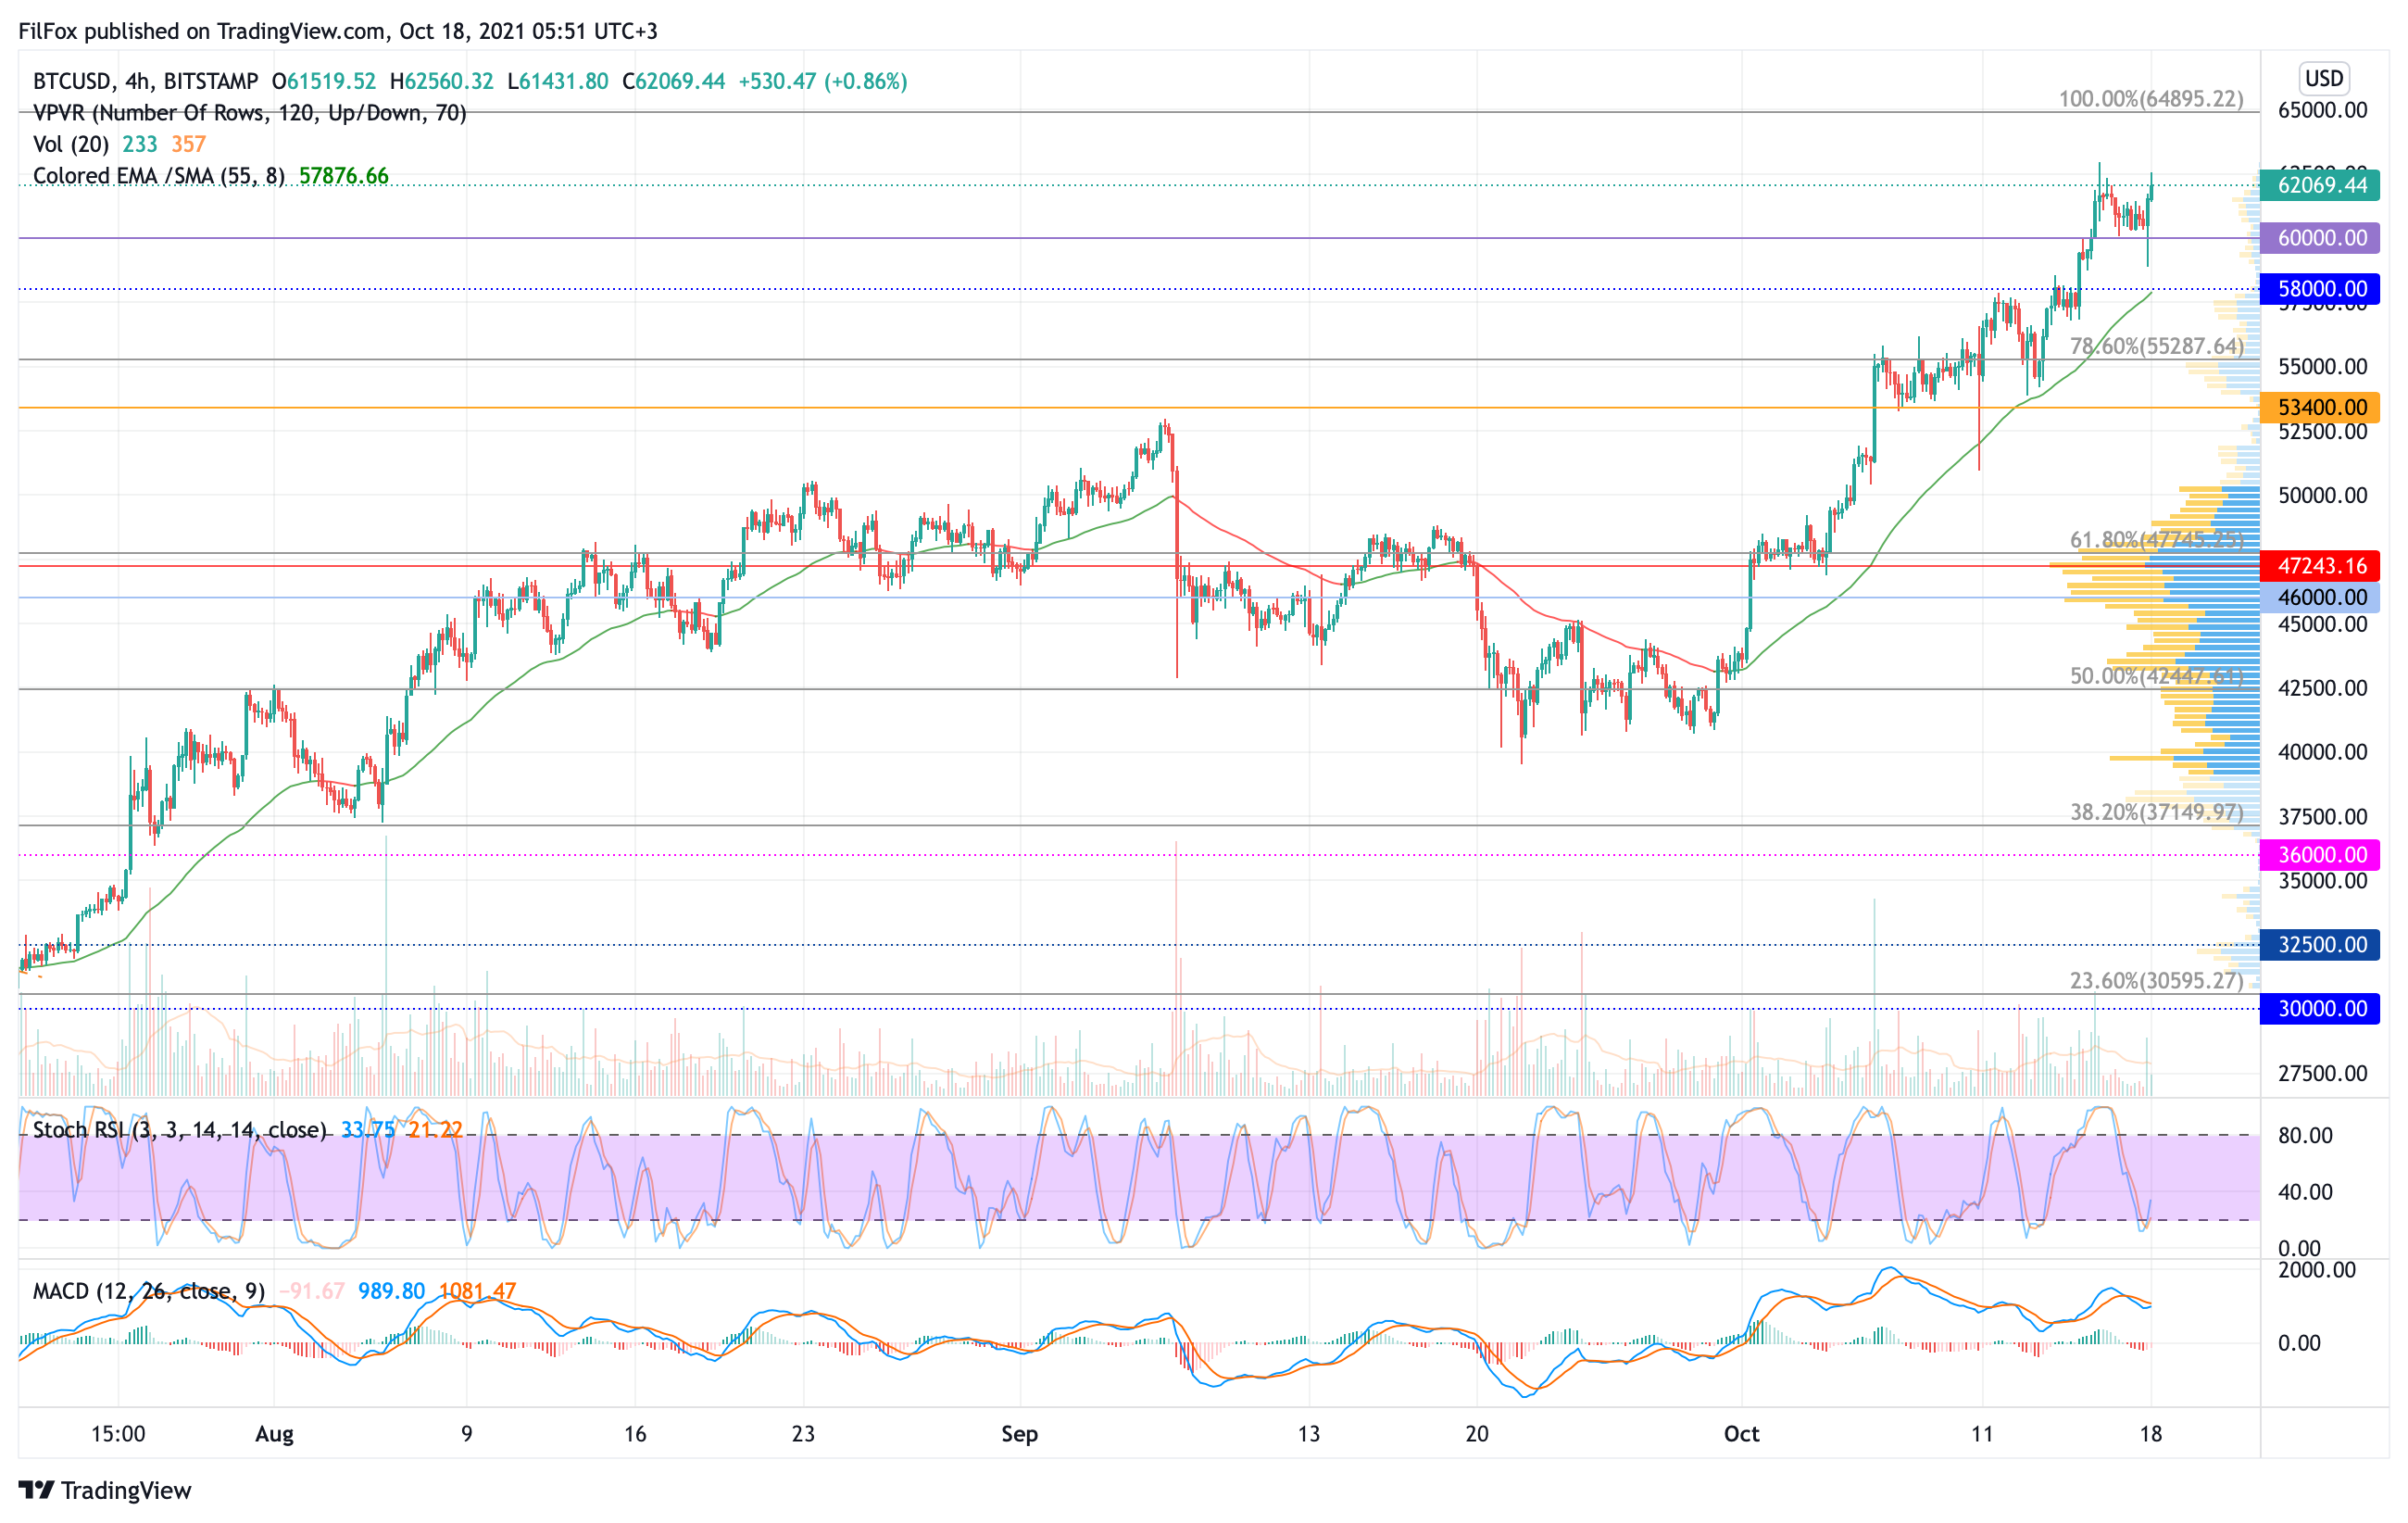 Analysis of the prices of Bitcoin, Ethereum, XRP for 10/18/2021